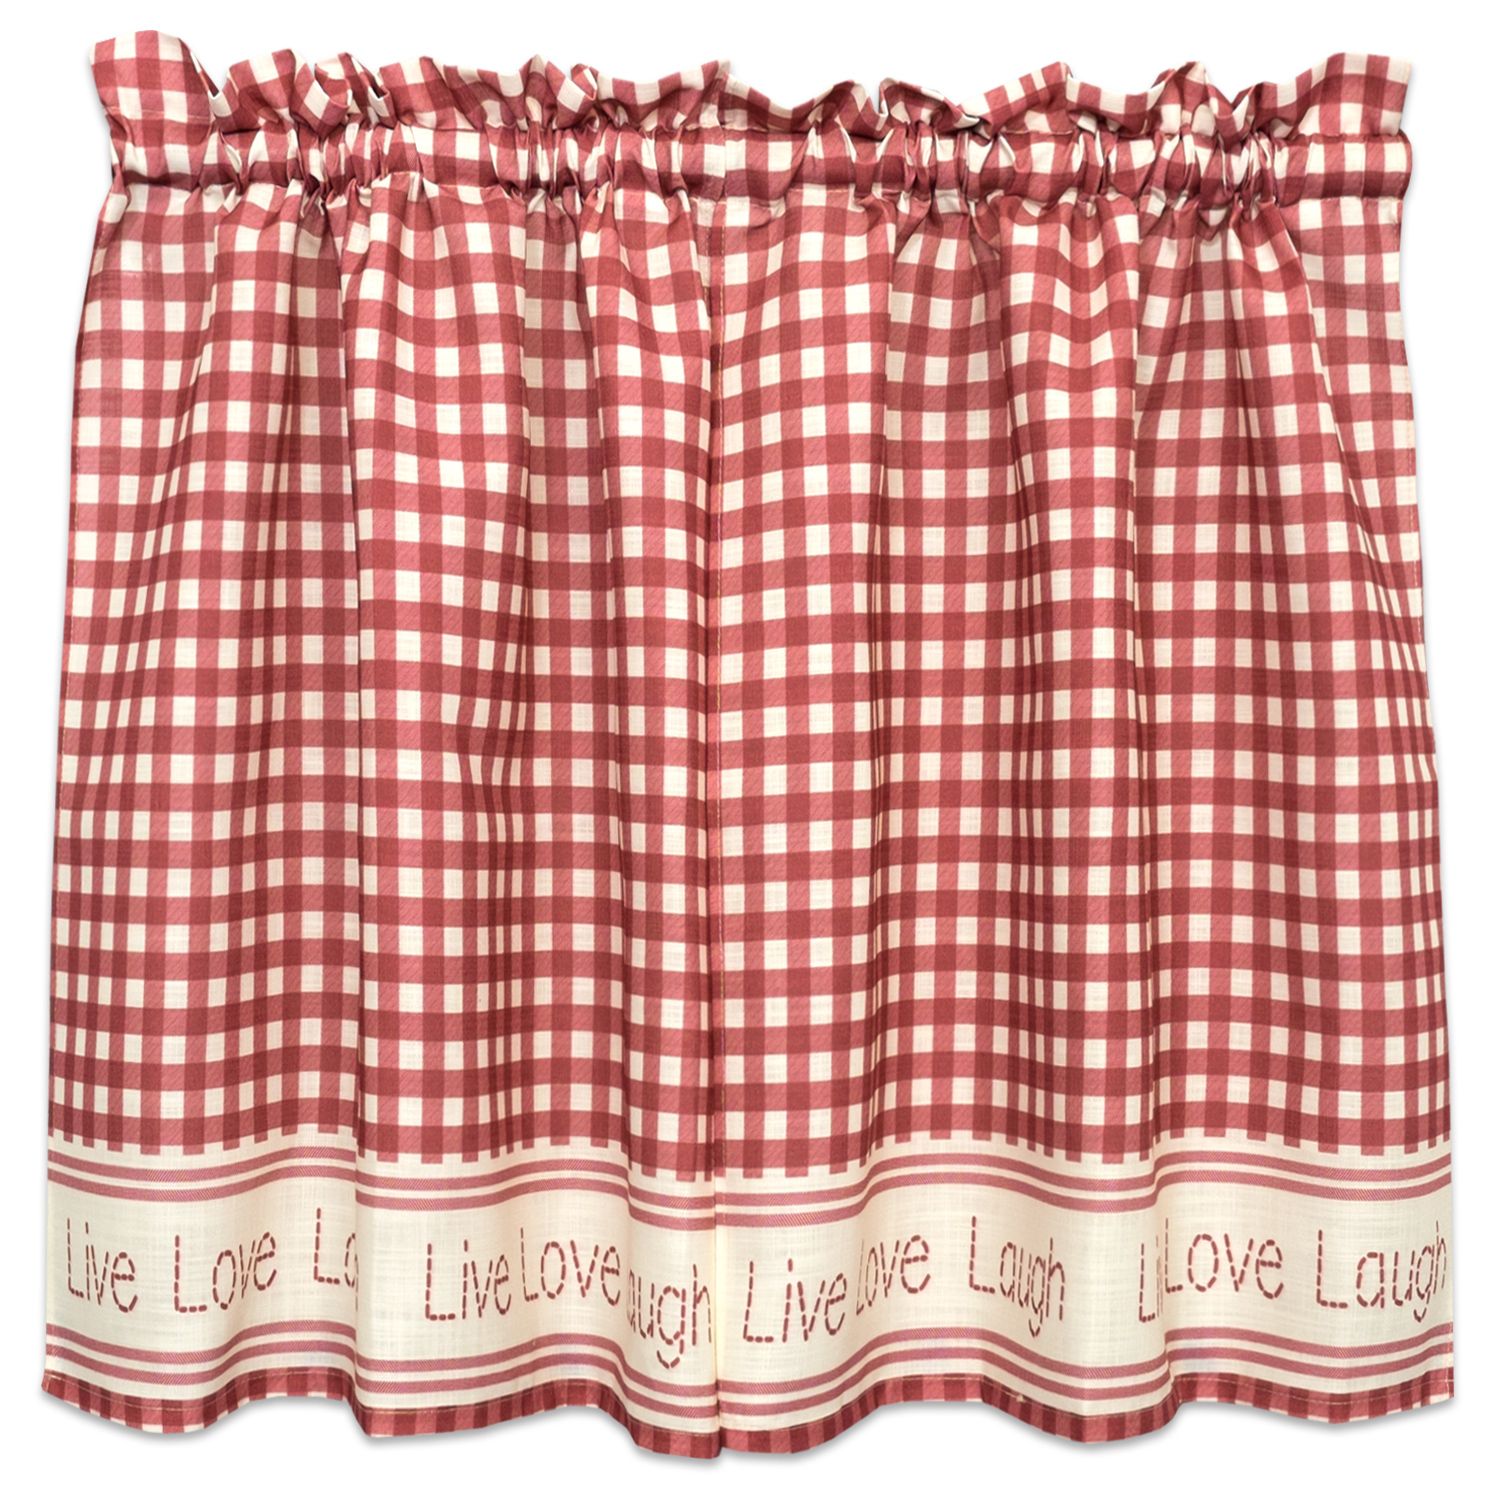 Gingham Stitch Live Laugh Love Kitchen Curtain Tier Pair Or Valance Red Throughout Live, Love, Laugh Window Curtain Tier Pair And Valance Sets (Photo 10 of 20)